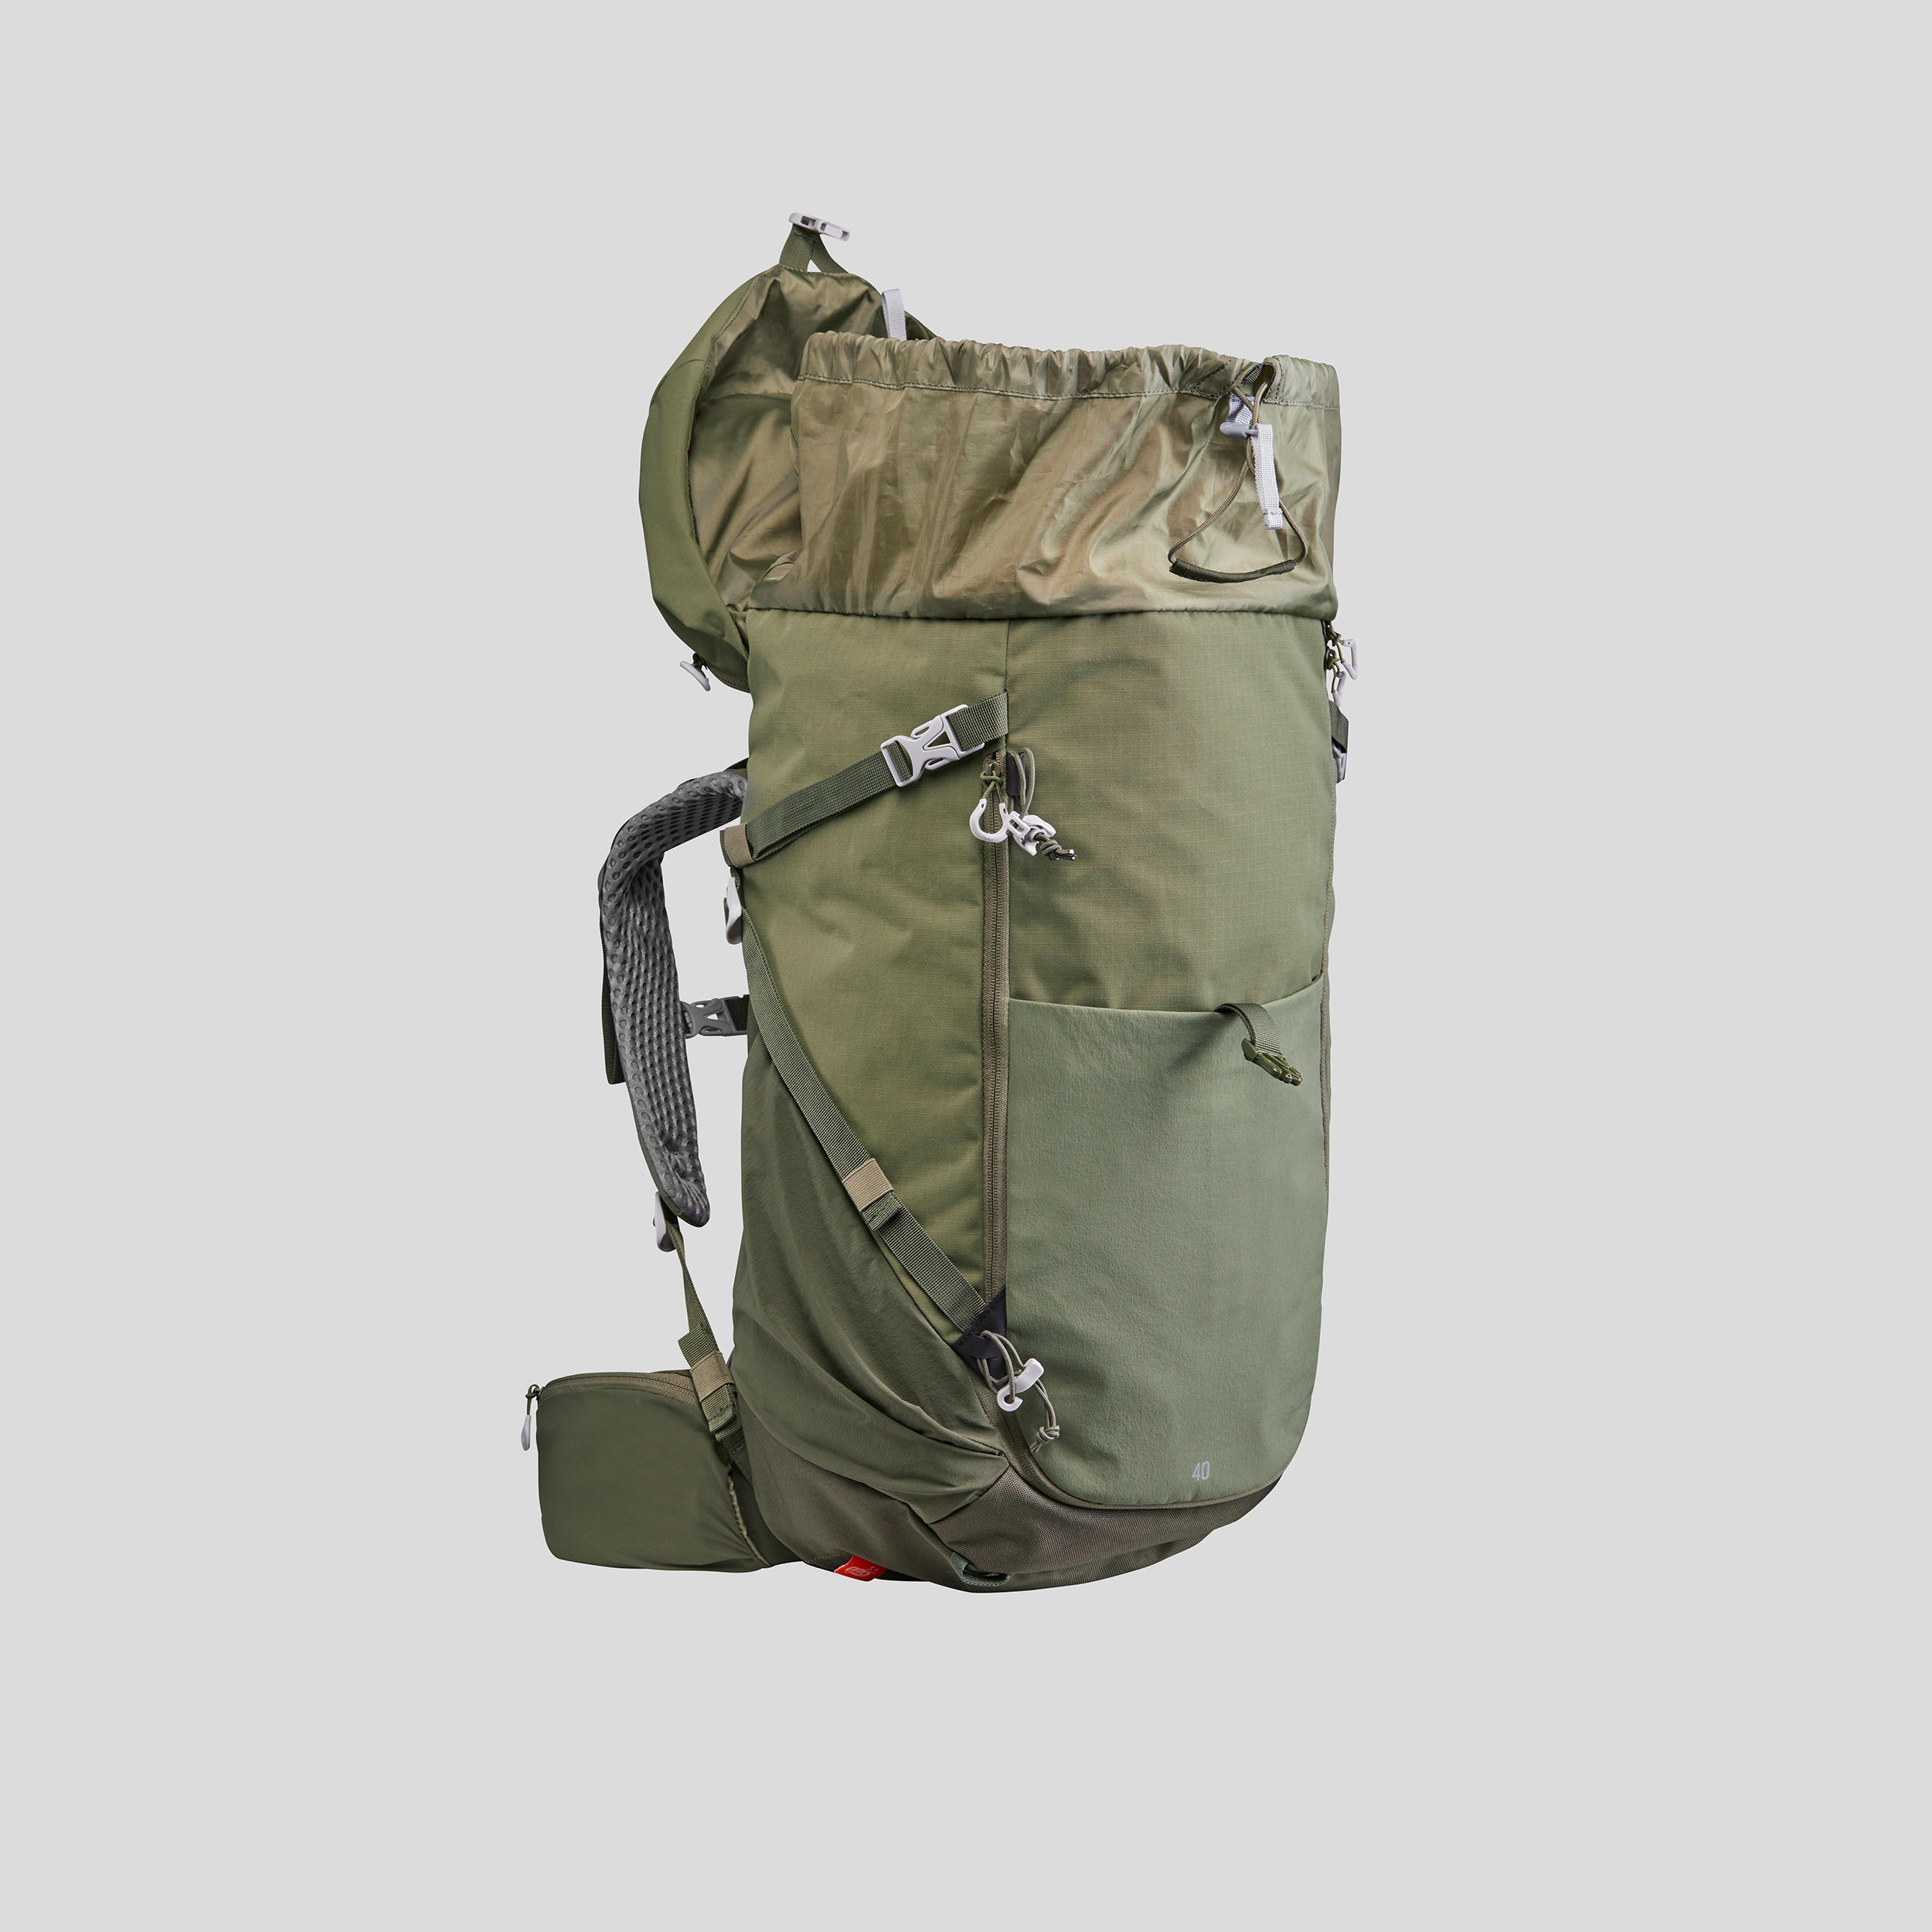 Mountain hiking backpack 40L - MH500 8/13